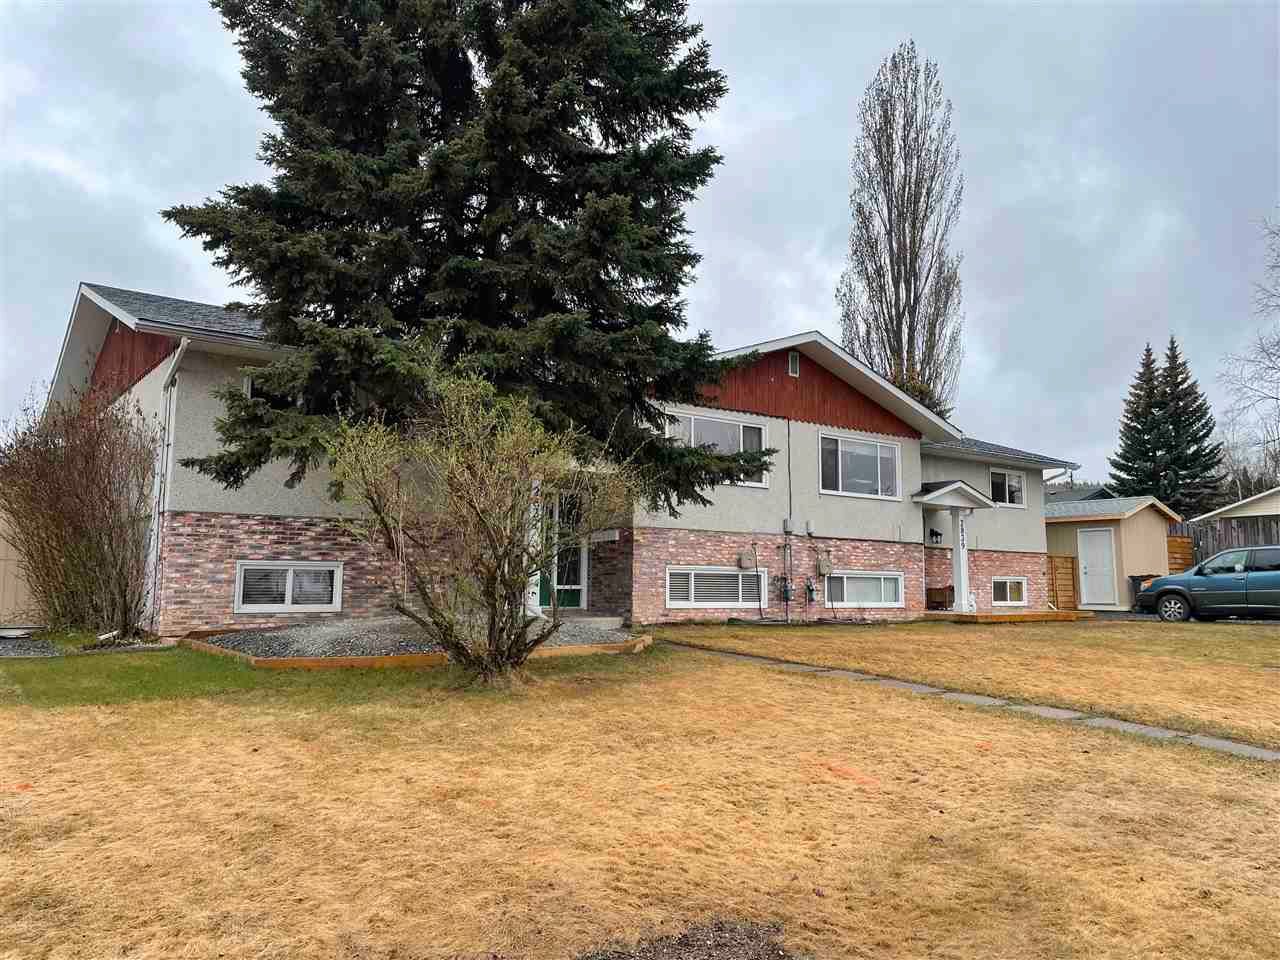 Main Photo: 2837 - 2839 ALEXANDER Crescent in Prince George: Westwood Duplex for sale (PG City West (Zone 71))  : MLS®# R2573333